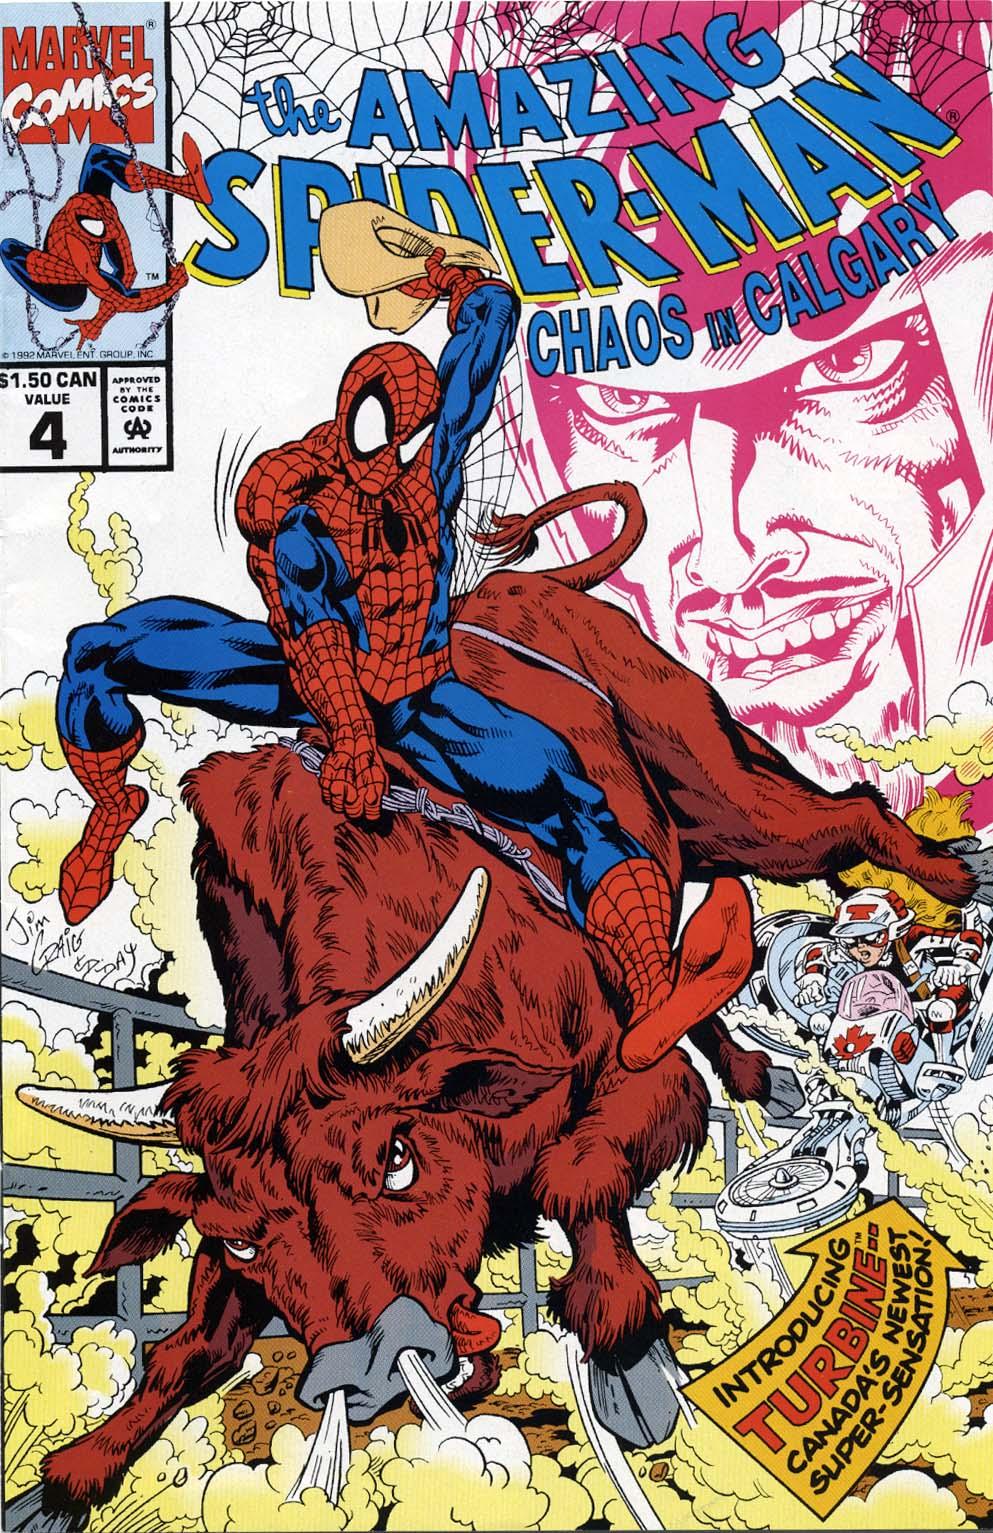 The Amazing Spider-Man: Chaos in Calgary Vol. 1 #4